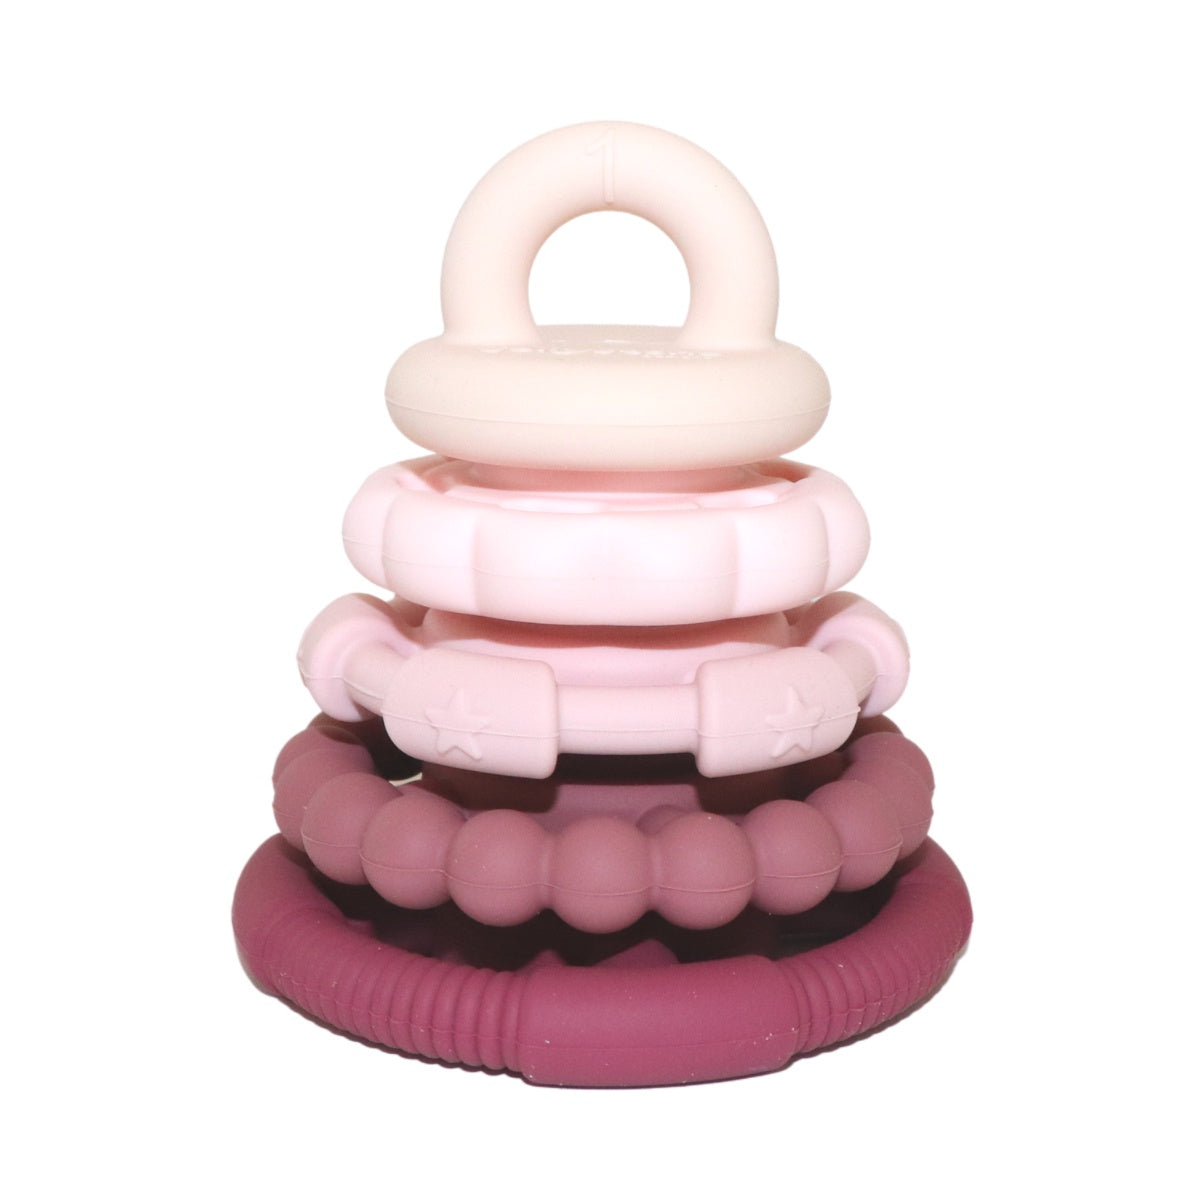 Jellystone Rainbow Stacker and Teether Toy - Dusty